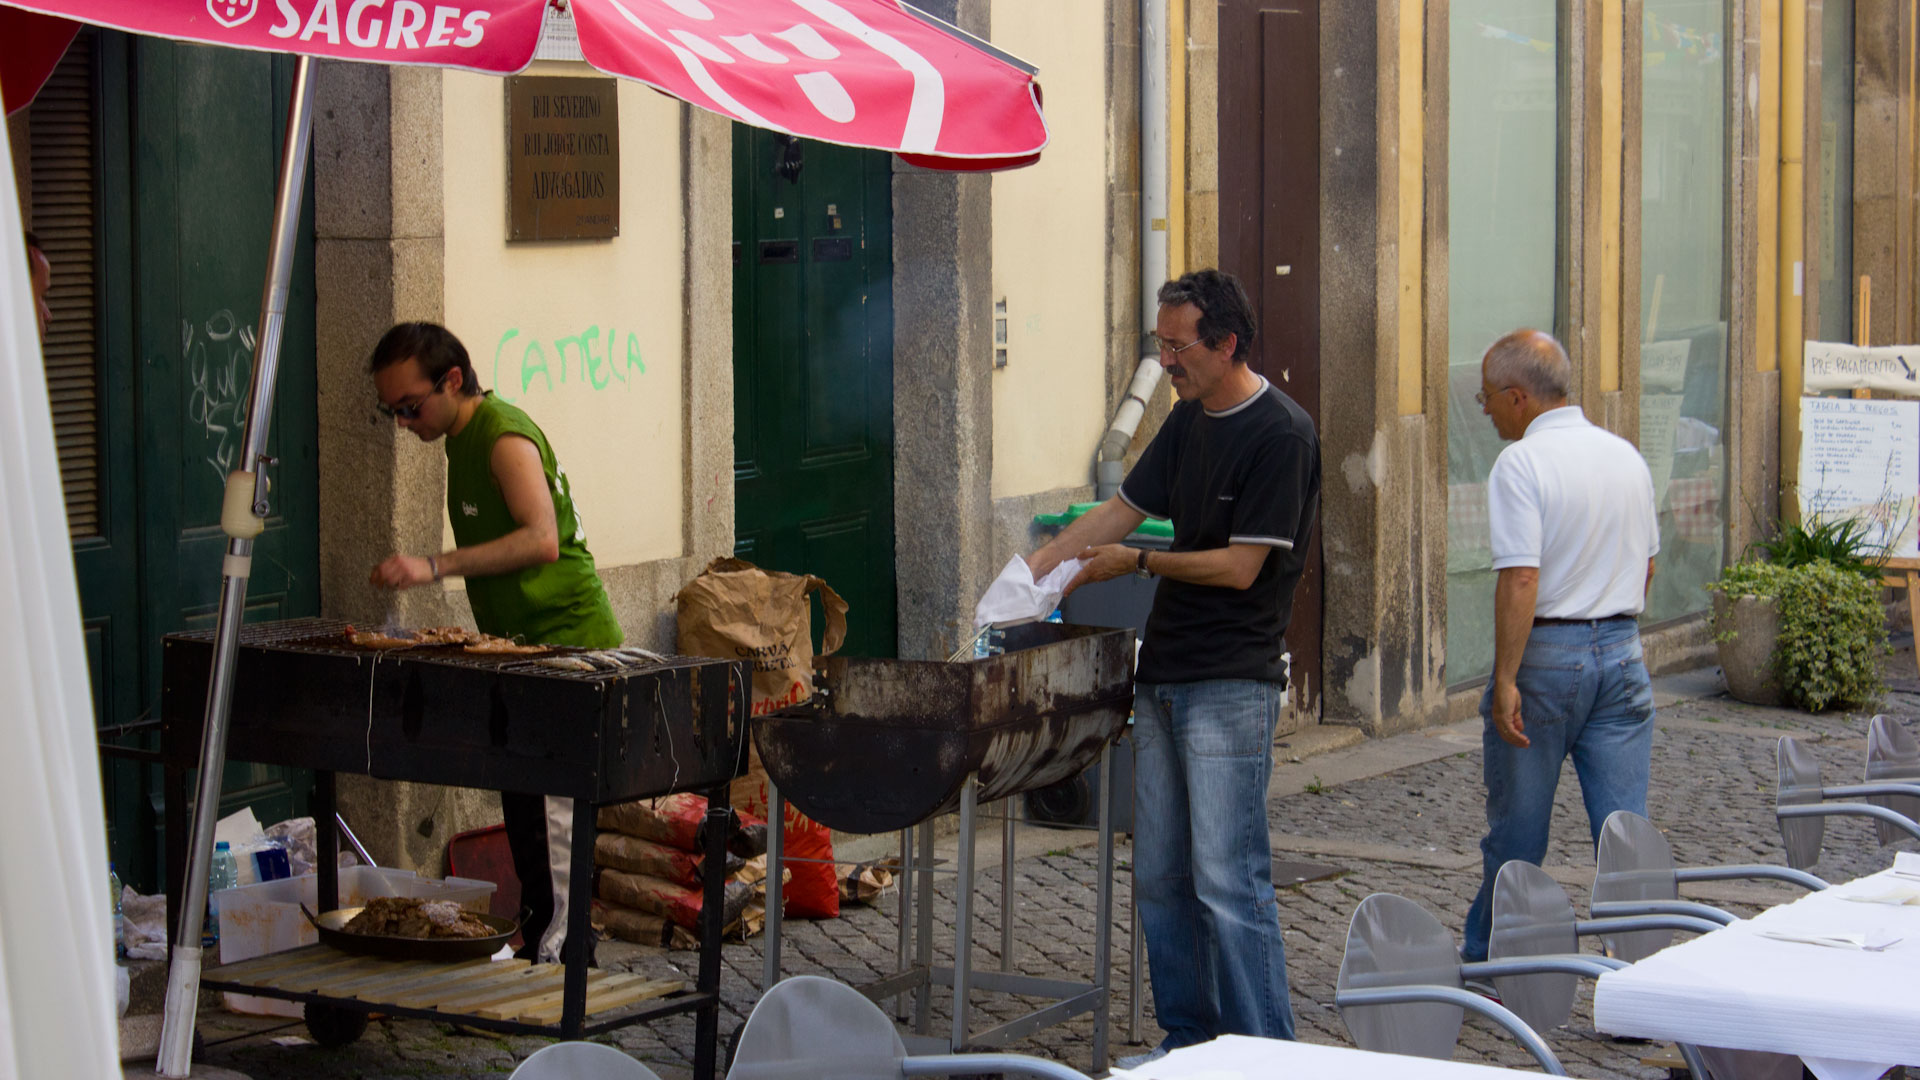 Barbeque in Portugal